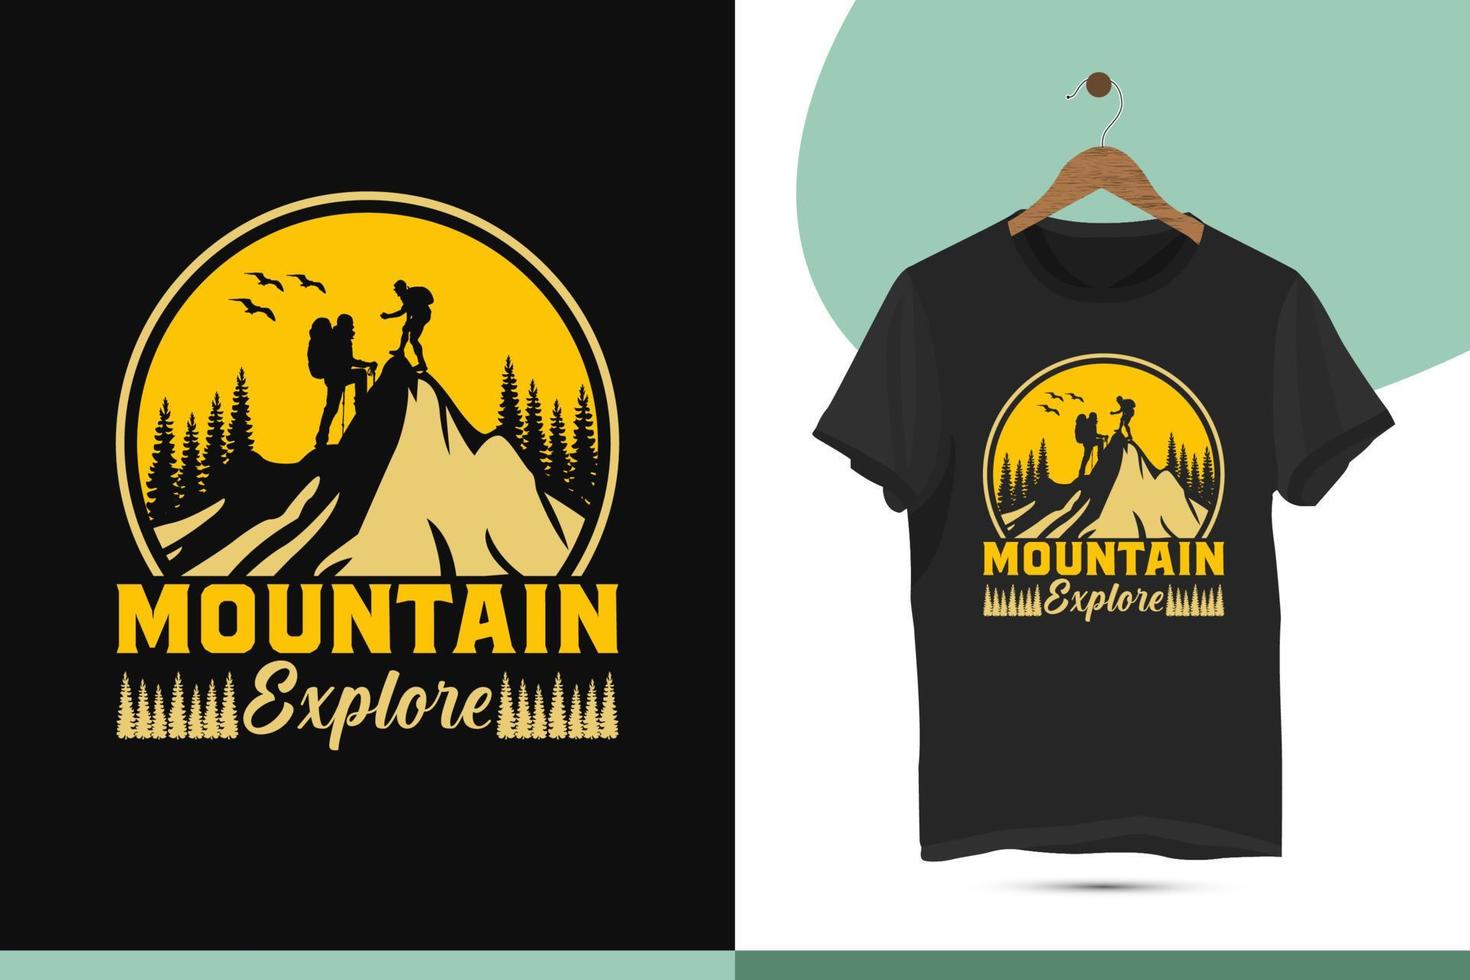 Mountain explore colorful t-shirt design template. Mountain adventure design print for apparel, shirt, clothe, bags, and mugs. Vector illustration with a hill, man, and nature.